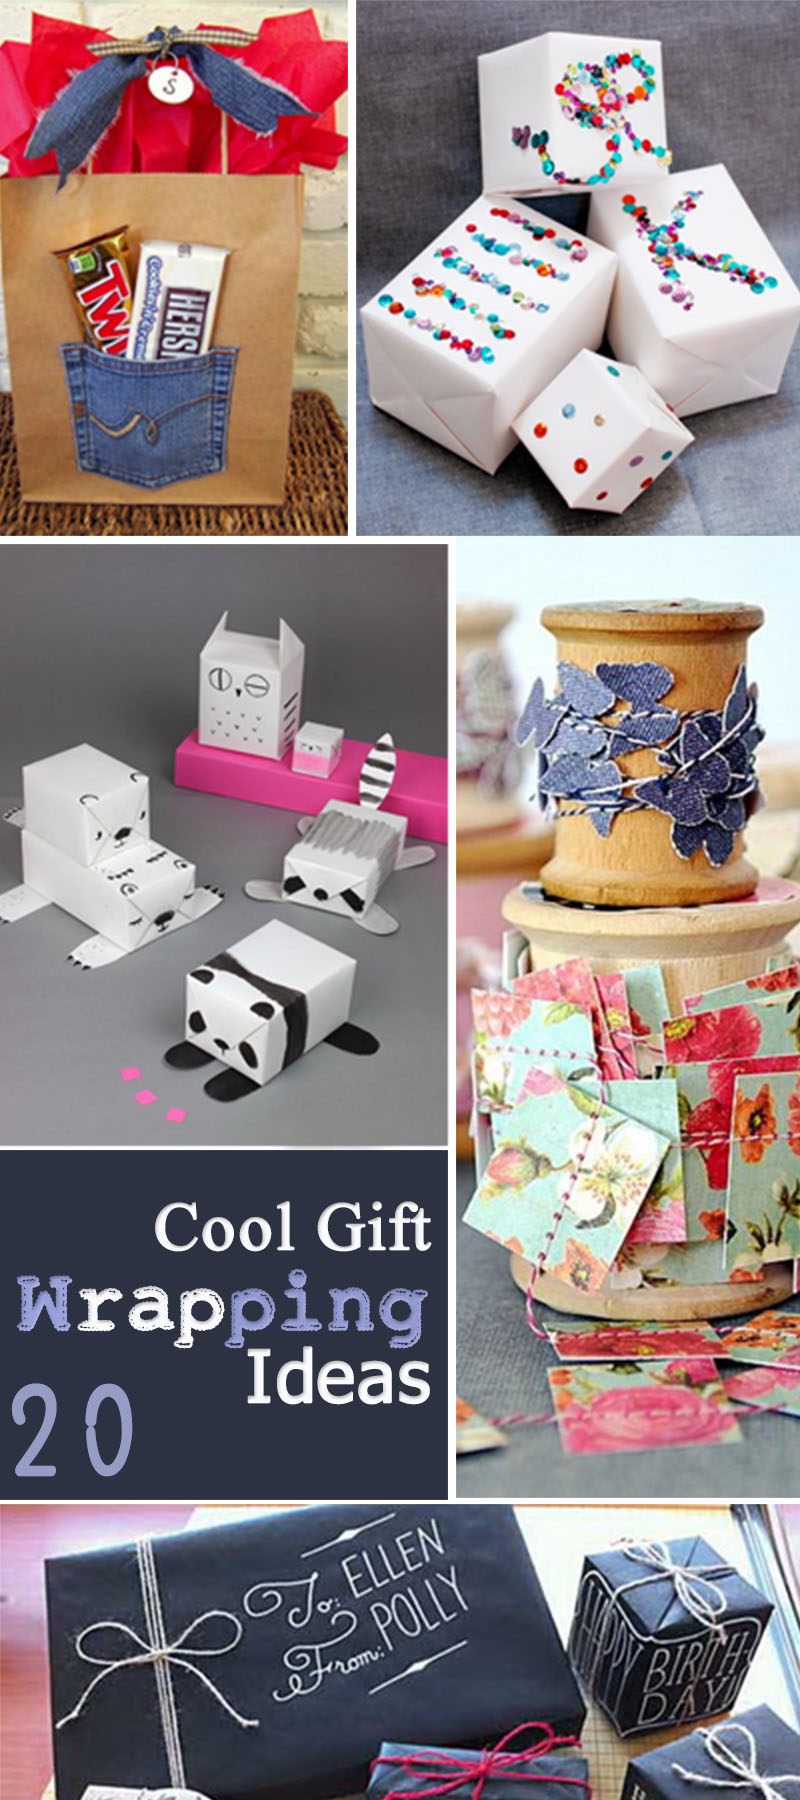 Cool Gift Wrapping Ideas!